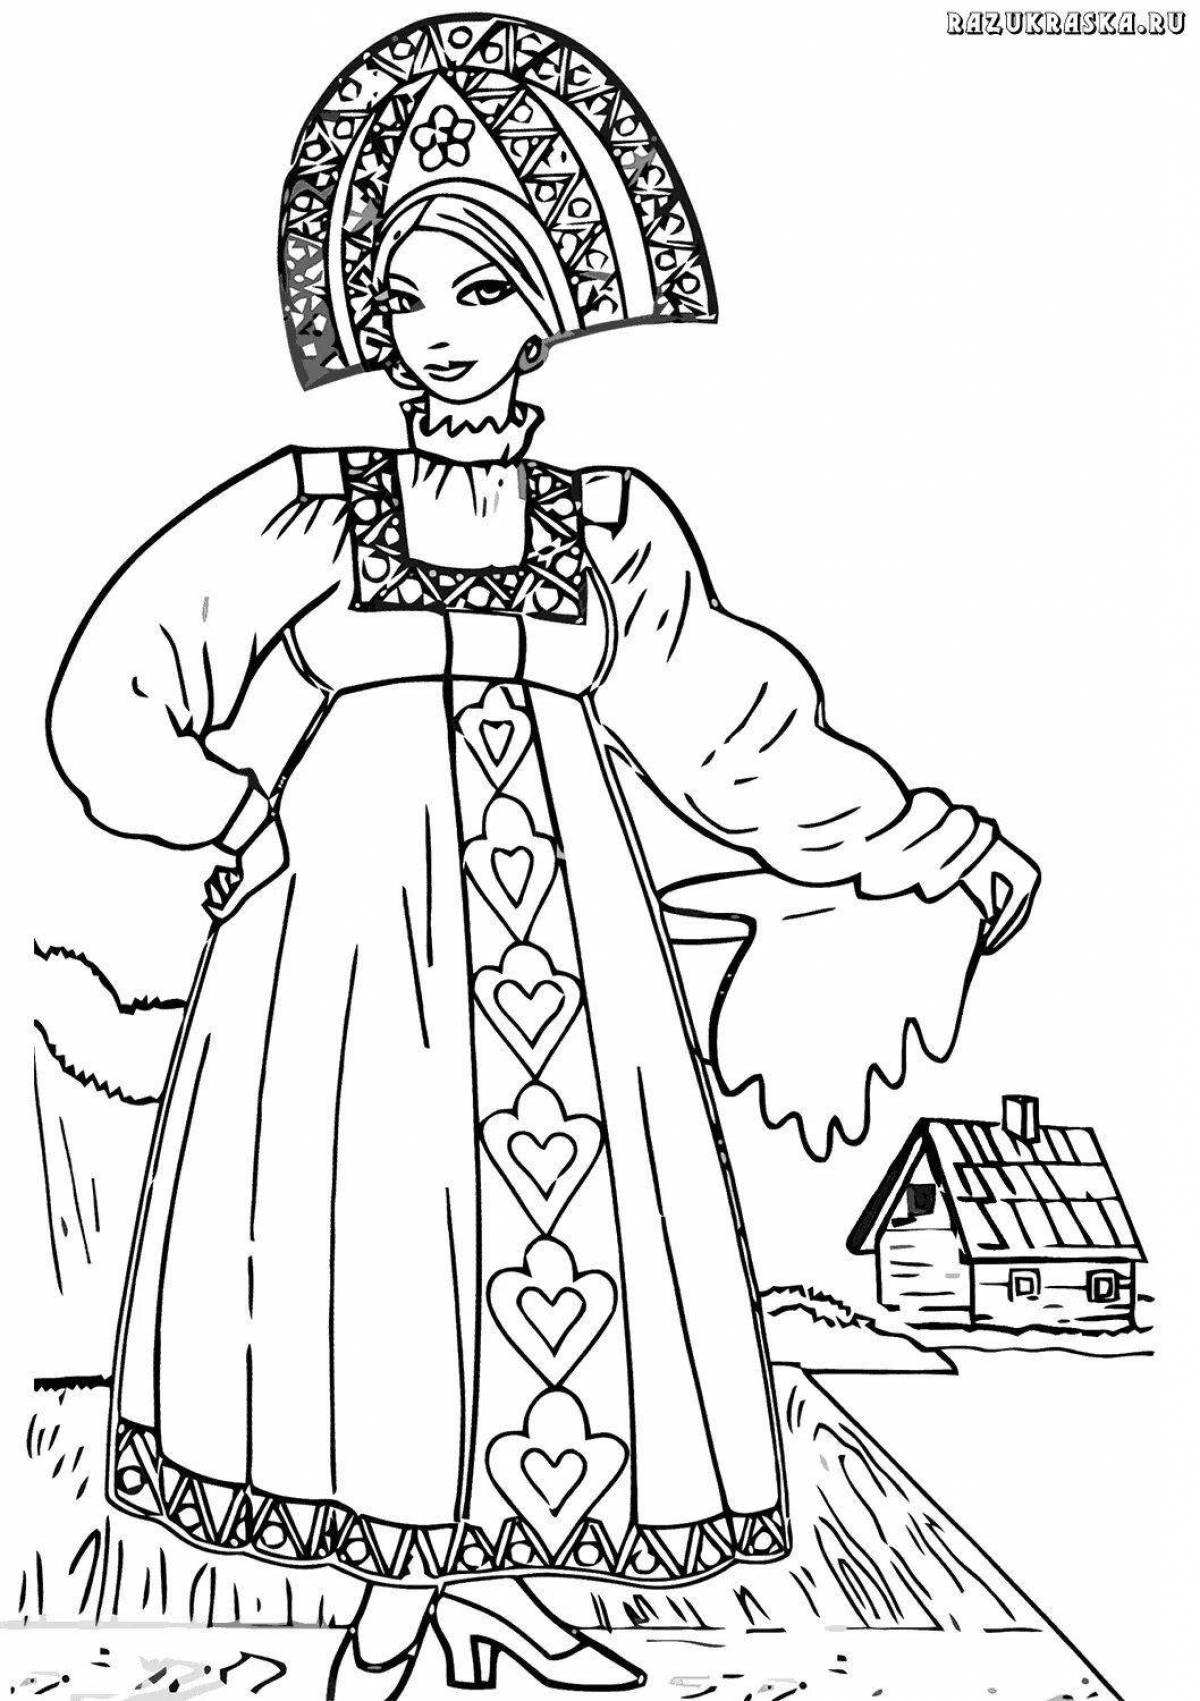 Coloring page festive Russian traditions